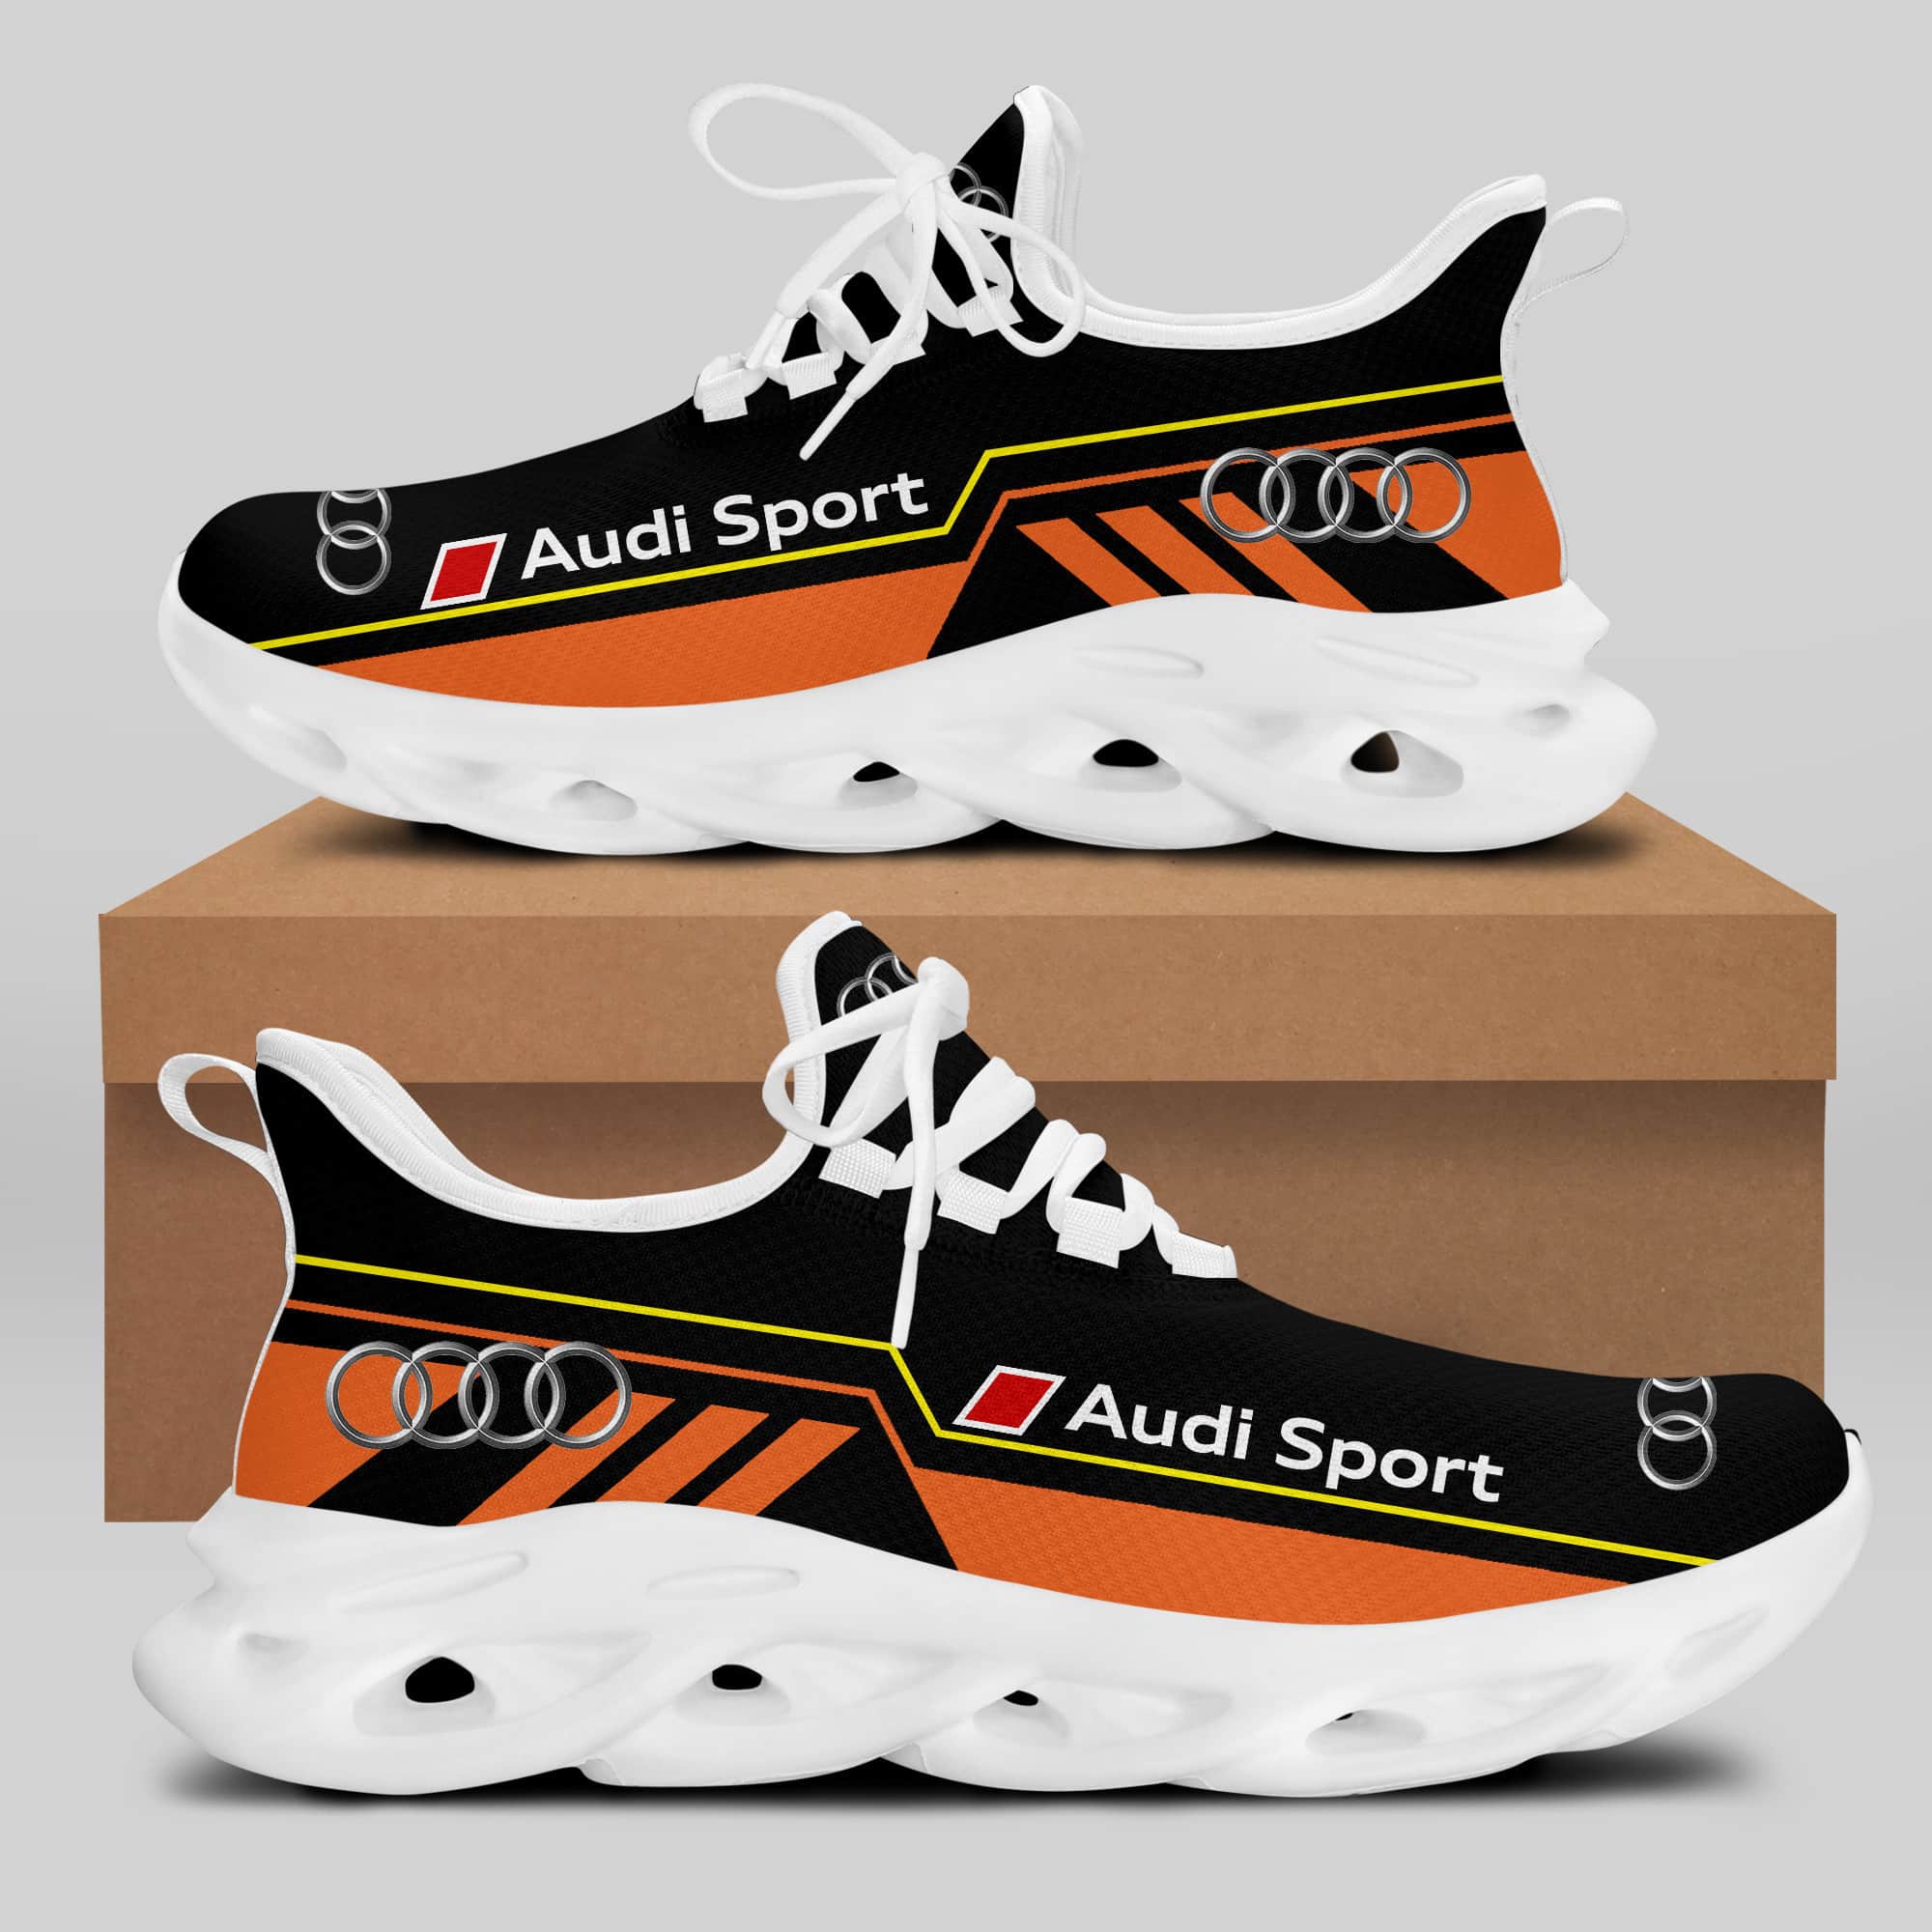 Audi Sport Running Shoes Max Soul Shoes Sneakers Ver 39 2